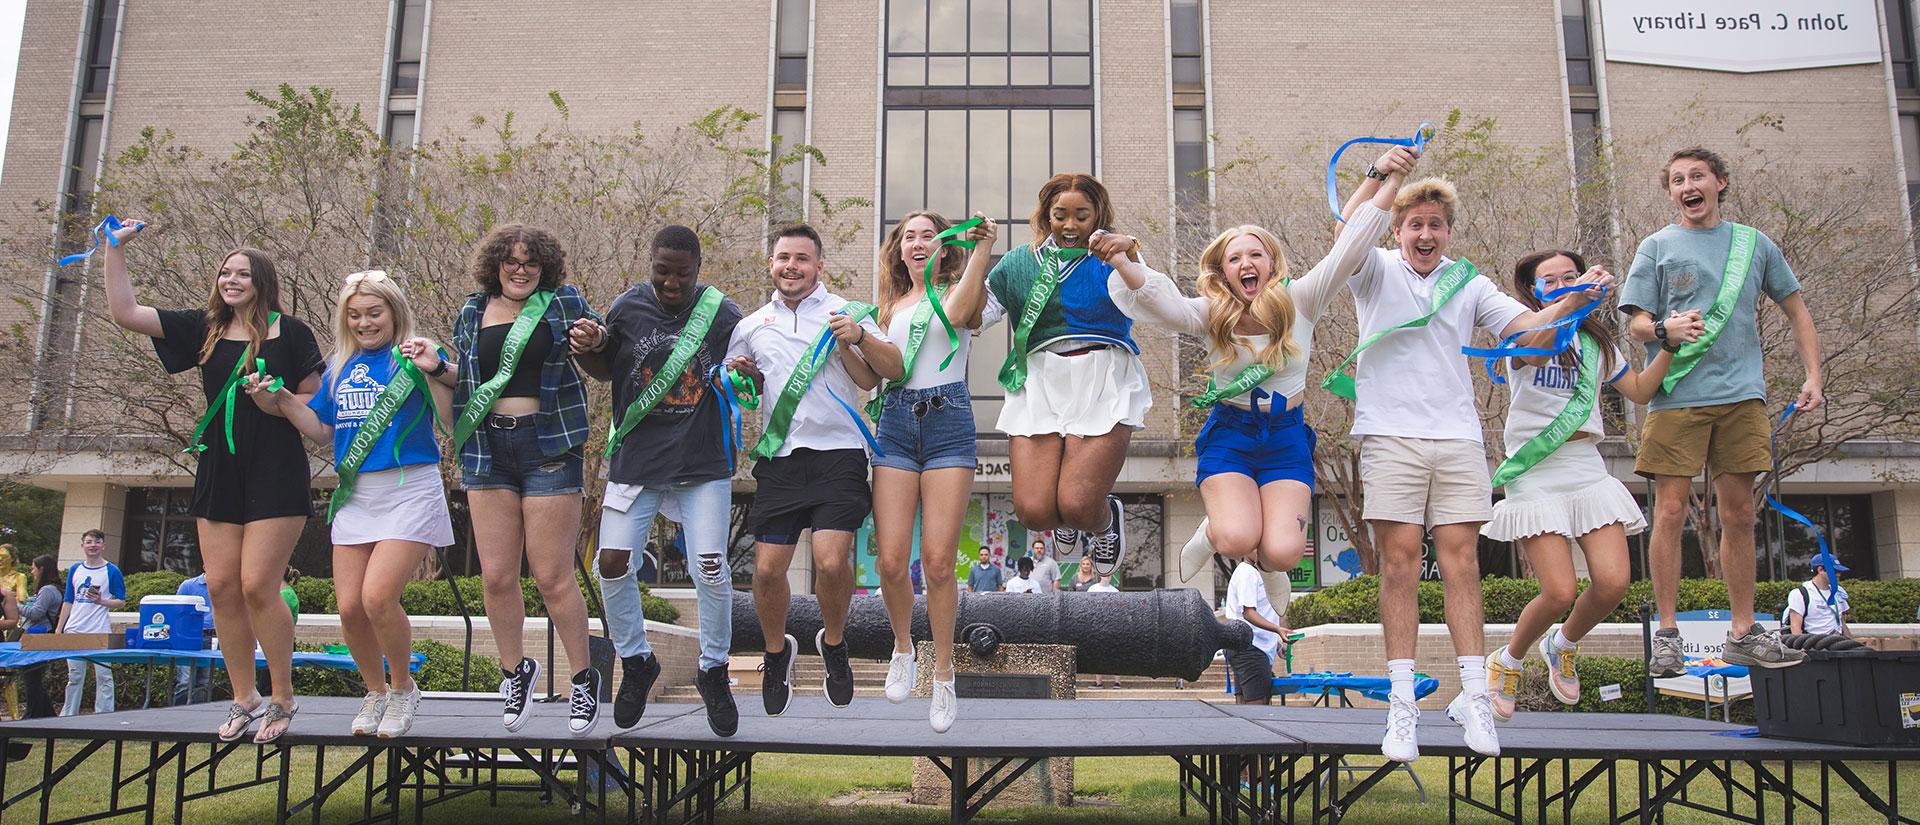 Students with Homecoming Court sashes jump in unison on Cannon Green